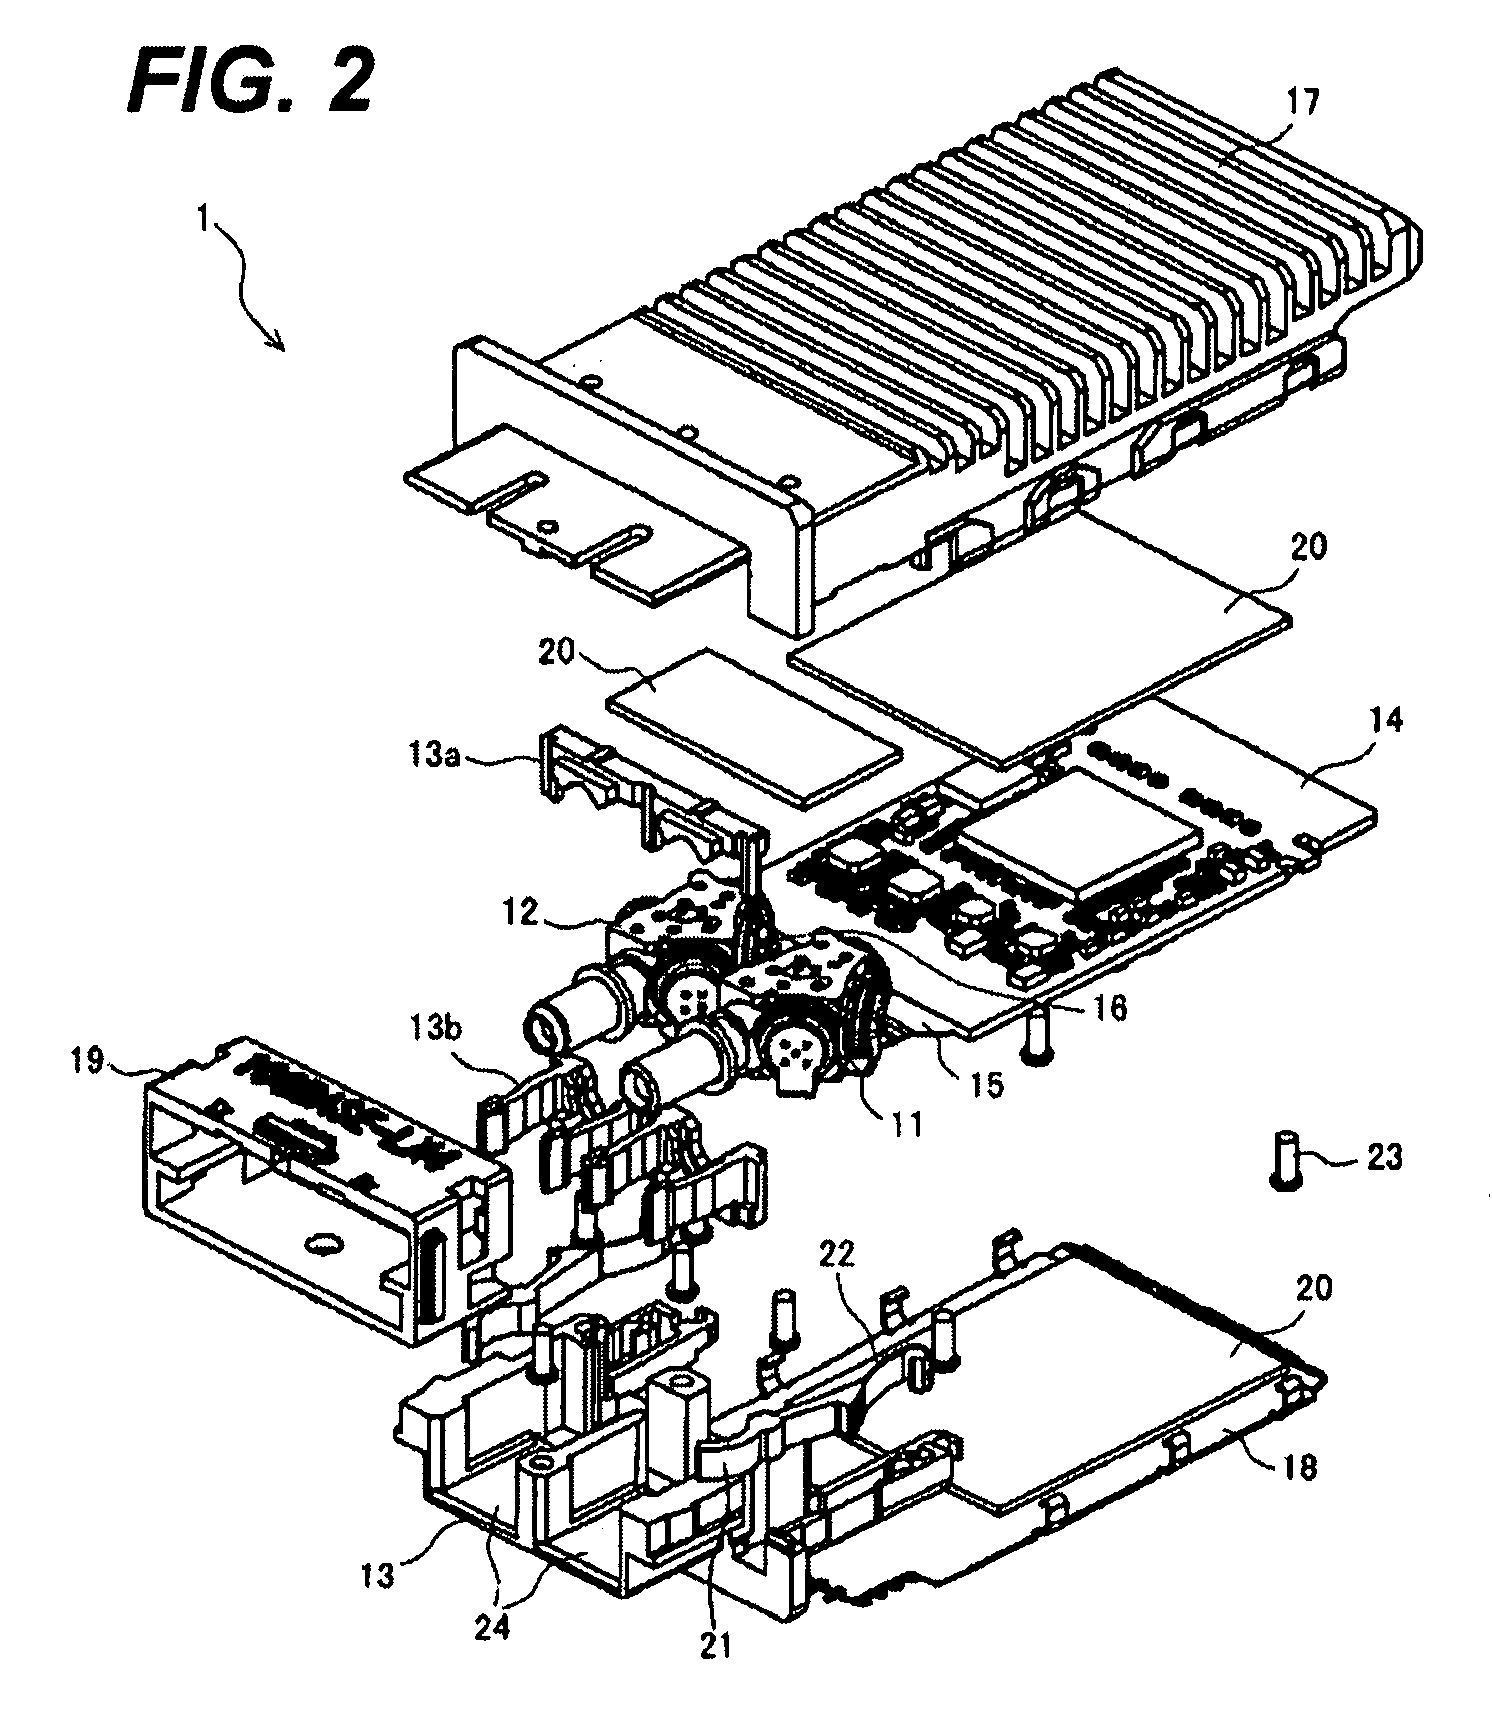 Optical transceiver with a plurality of optical subassemblies electrically connected by integrated FPC board with a substrate